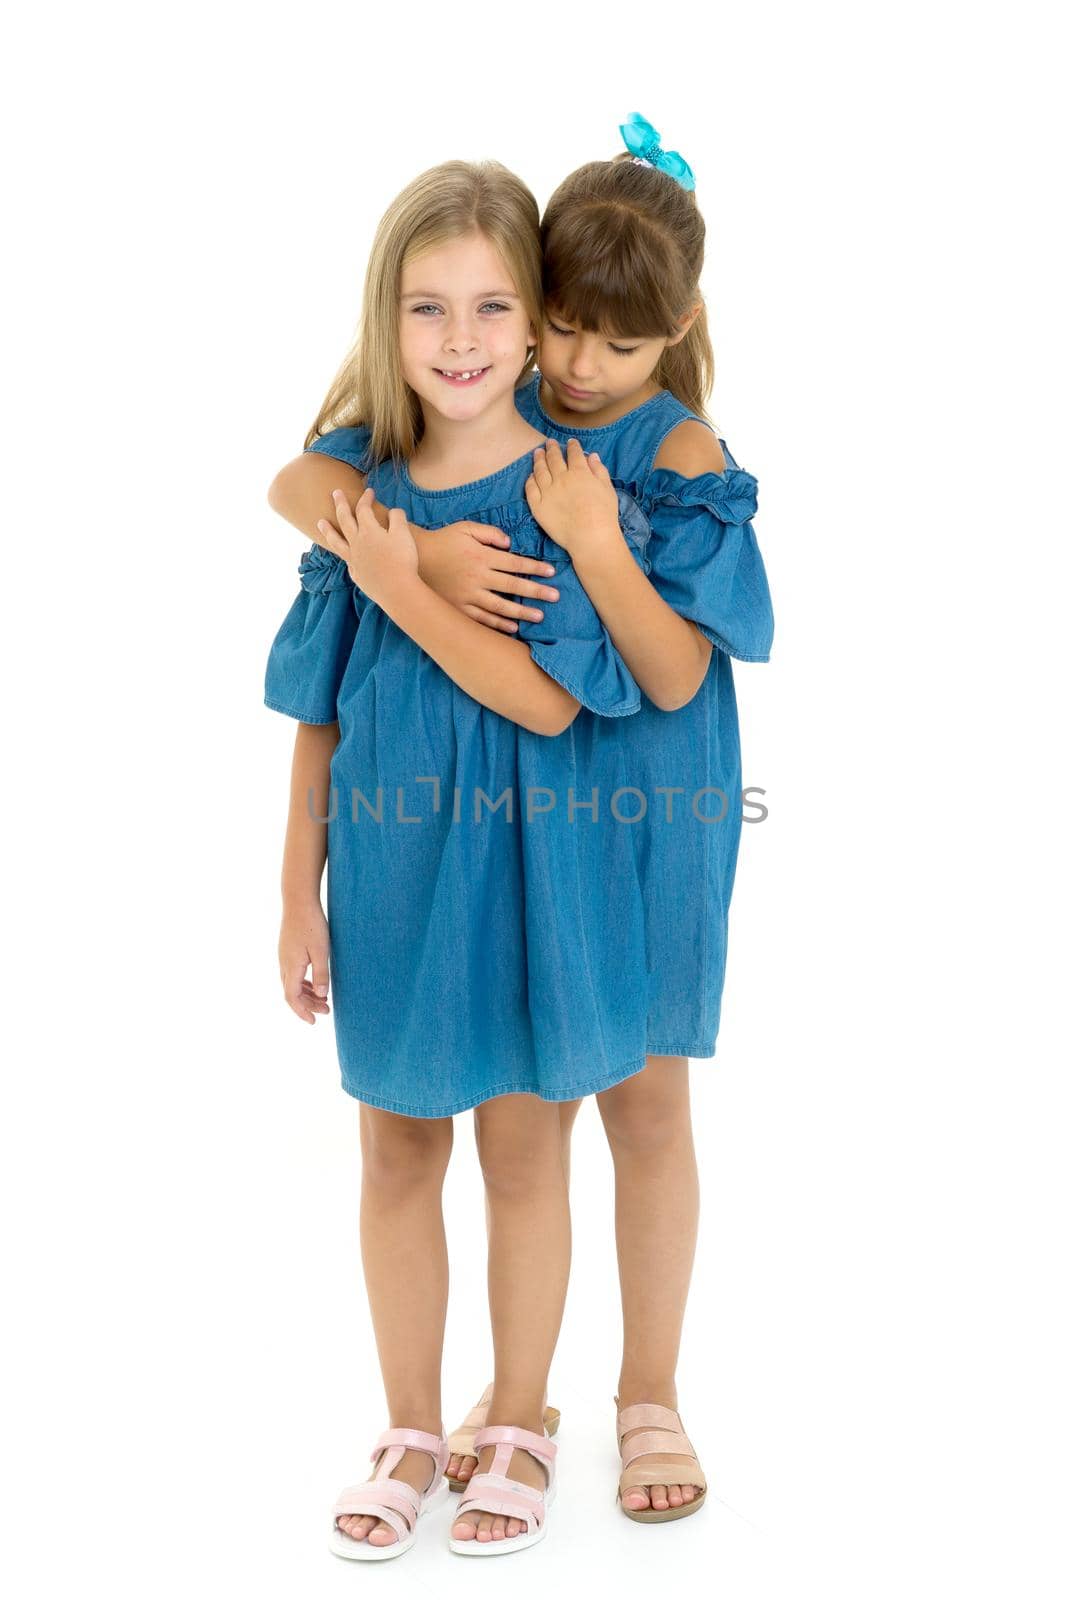 Portrait of a cute girl. Adorable girls dressed in matching denim dresses hug each other tightly with their backs pressed against an isolated white background.